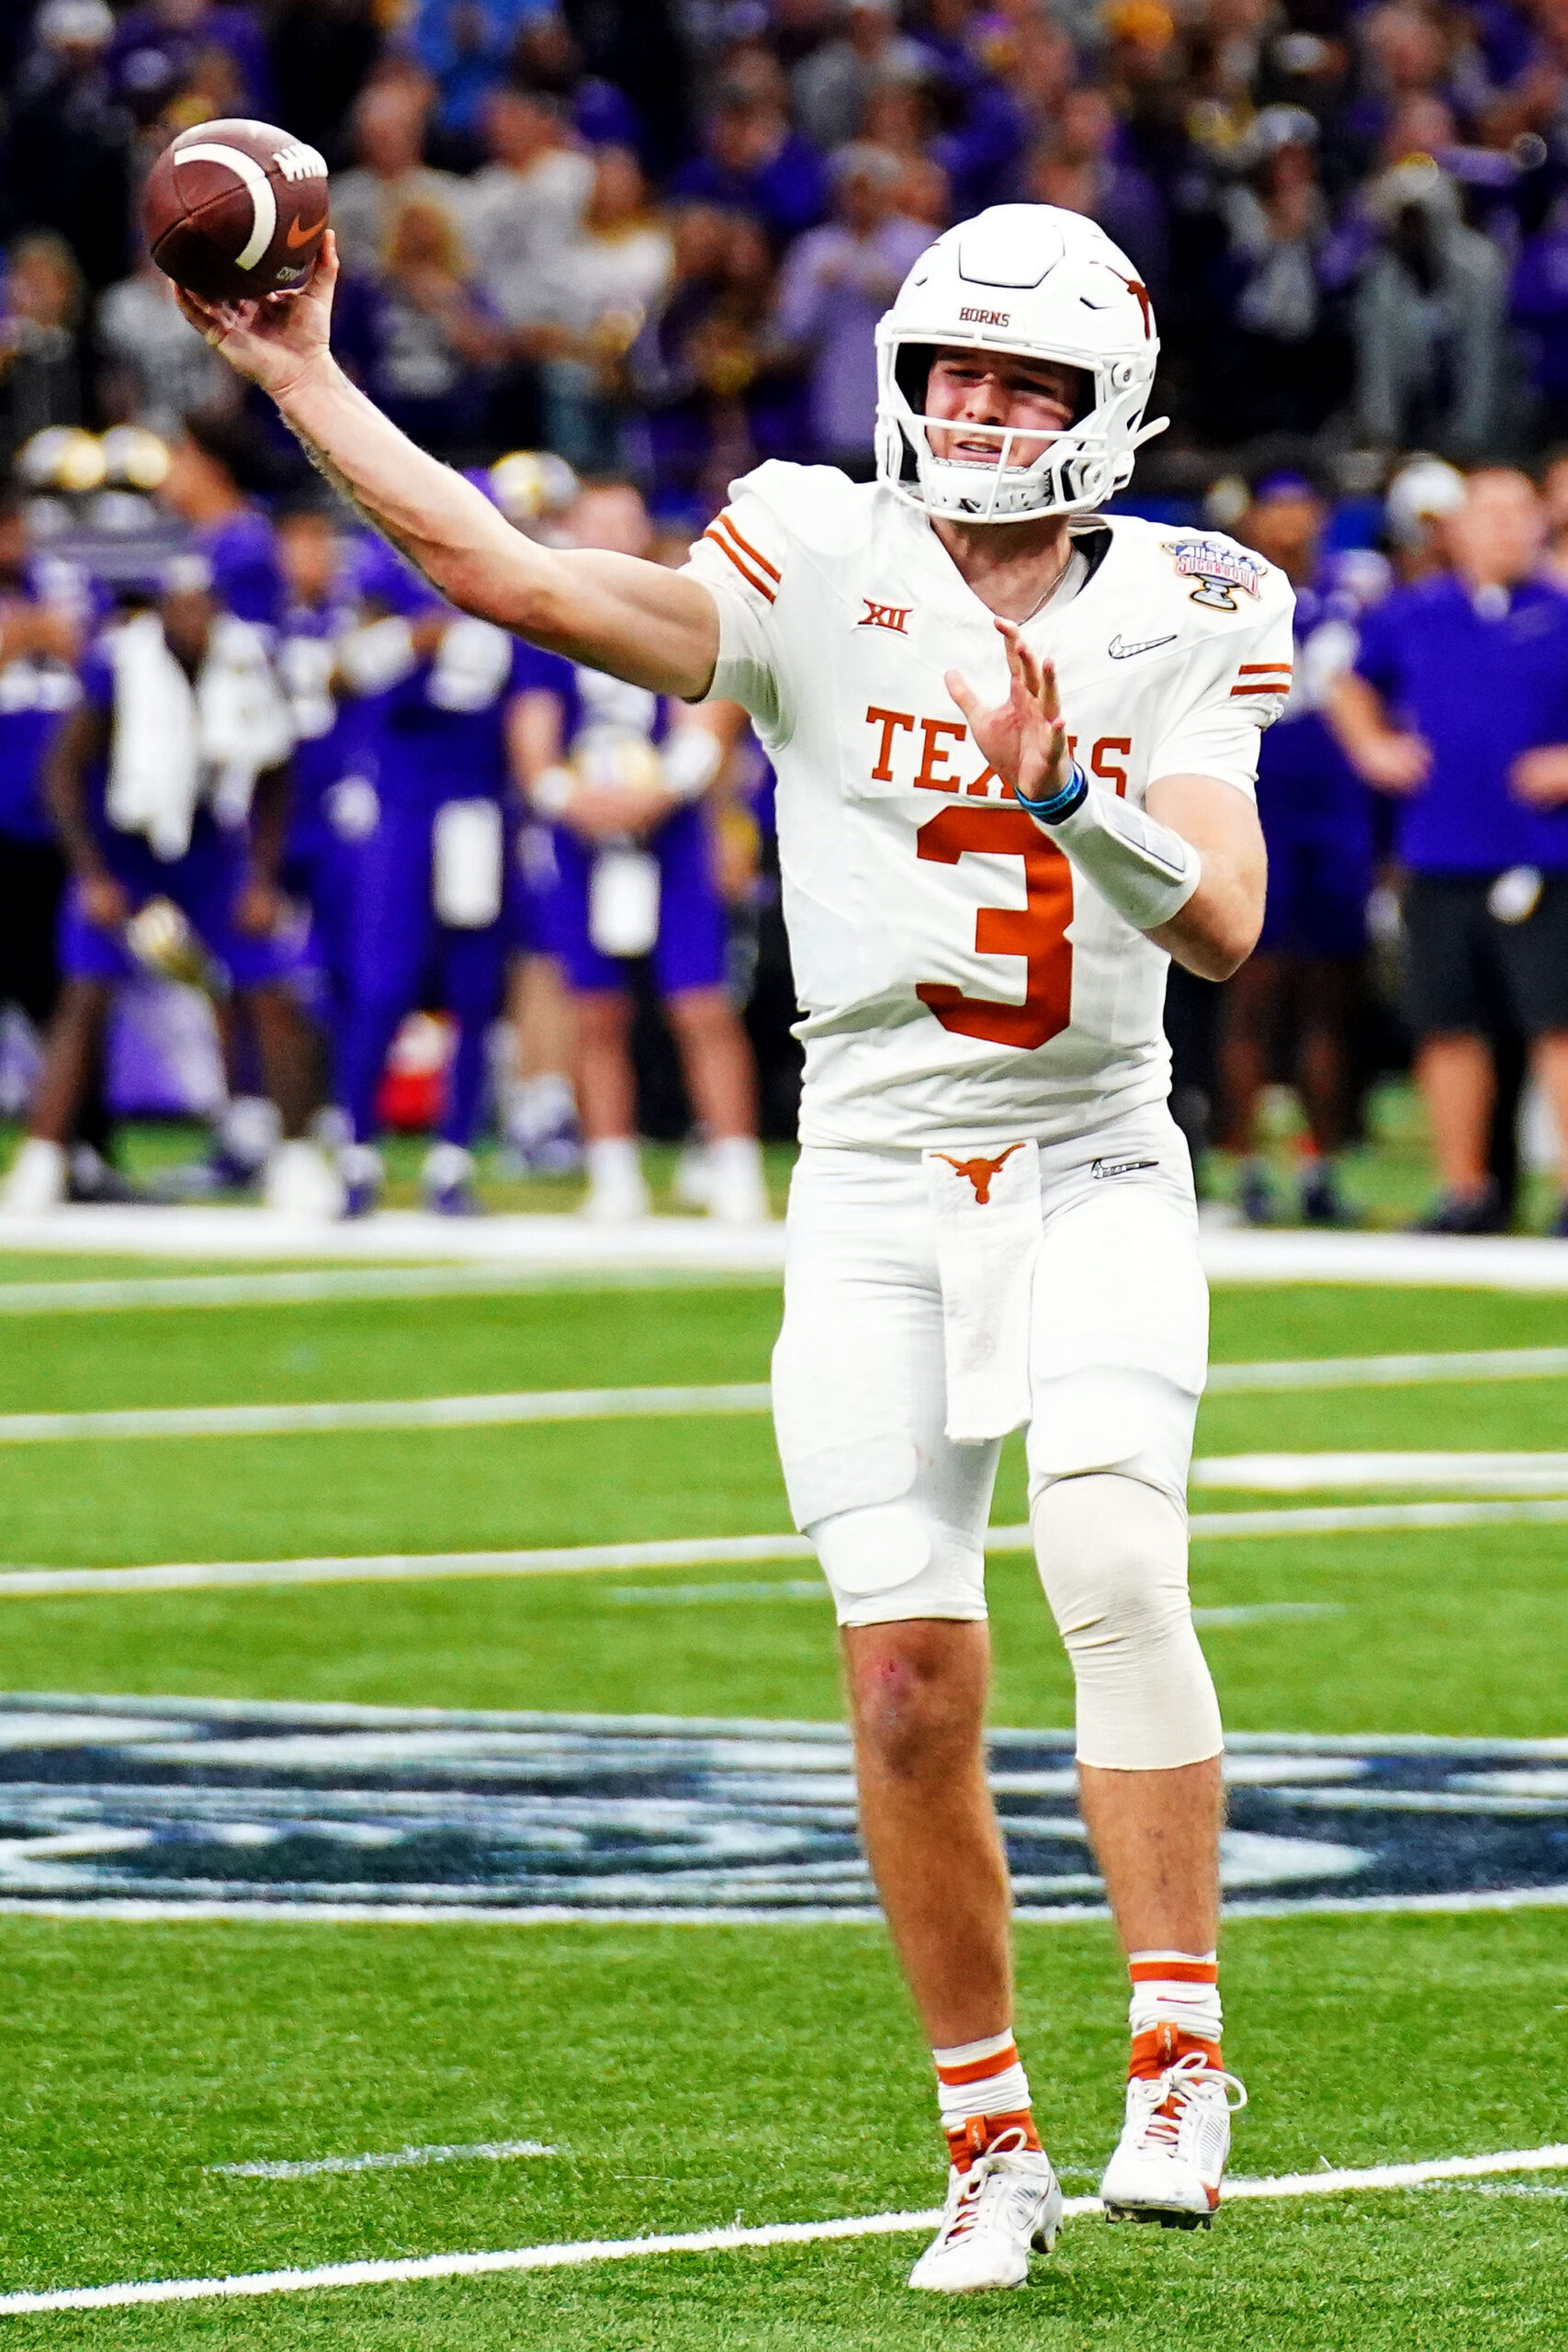 That Guy': Texas QB Quinn Ewers Has Taken Major Step Forward In One Key  Area - Sports Illustrated Texas Longhorns News, Analysis and More